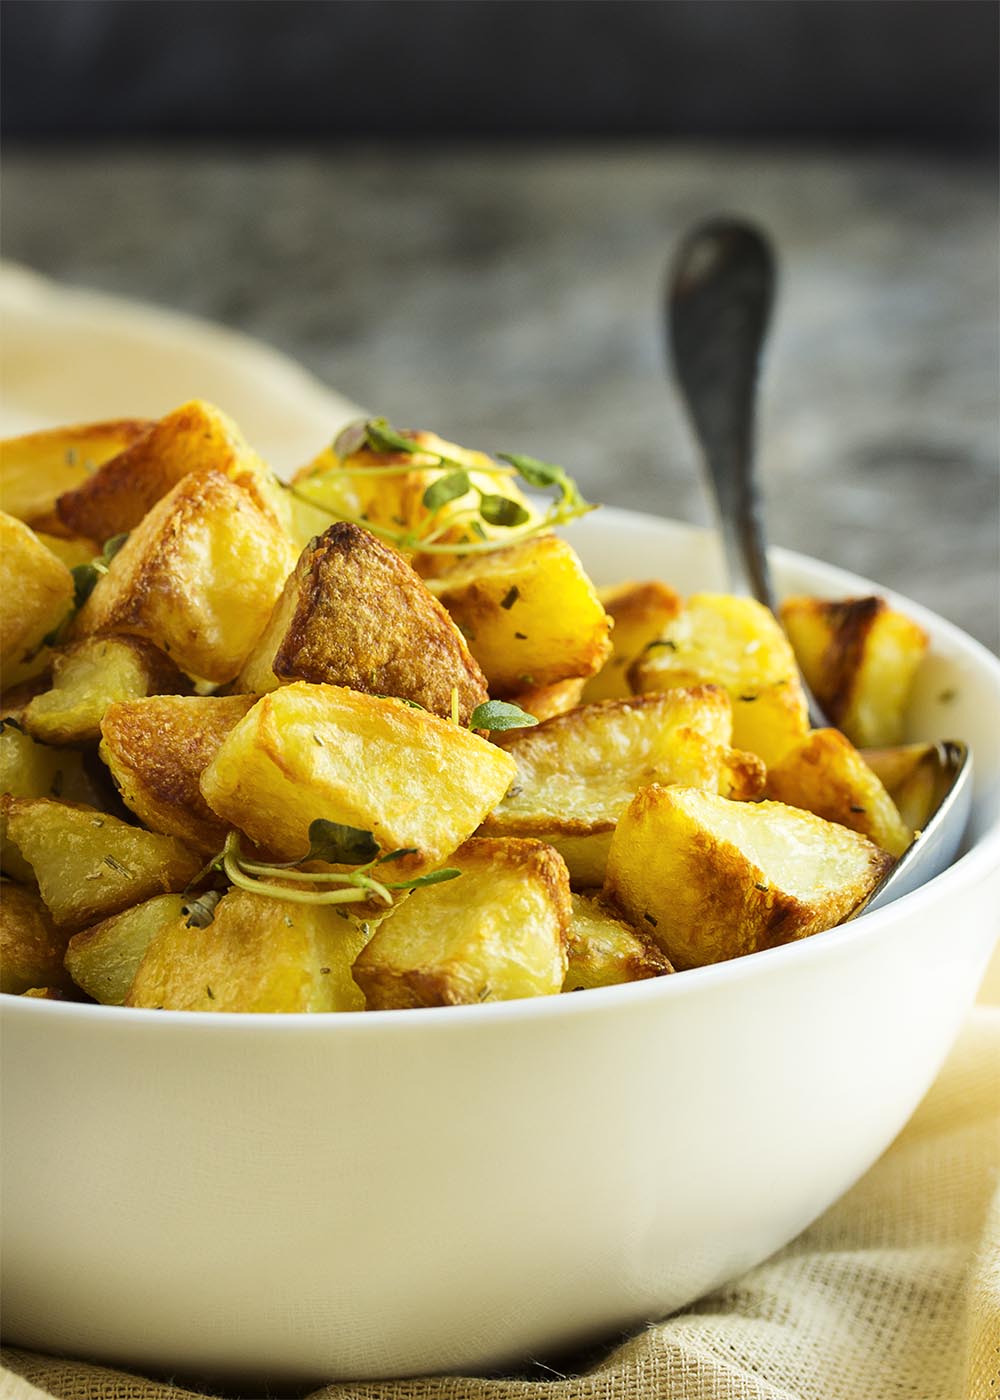 Crispy Roasted Potatoes - There is just one little trick to turning basic roasted potatoes into extra crispy and yummy roasted potatoes. This is the roasted potato side dish you've been looking for. | justalittlebitofbacon.com